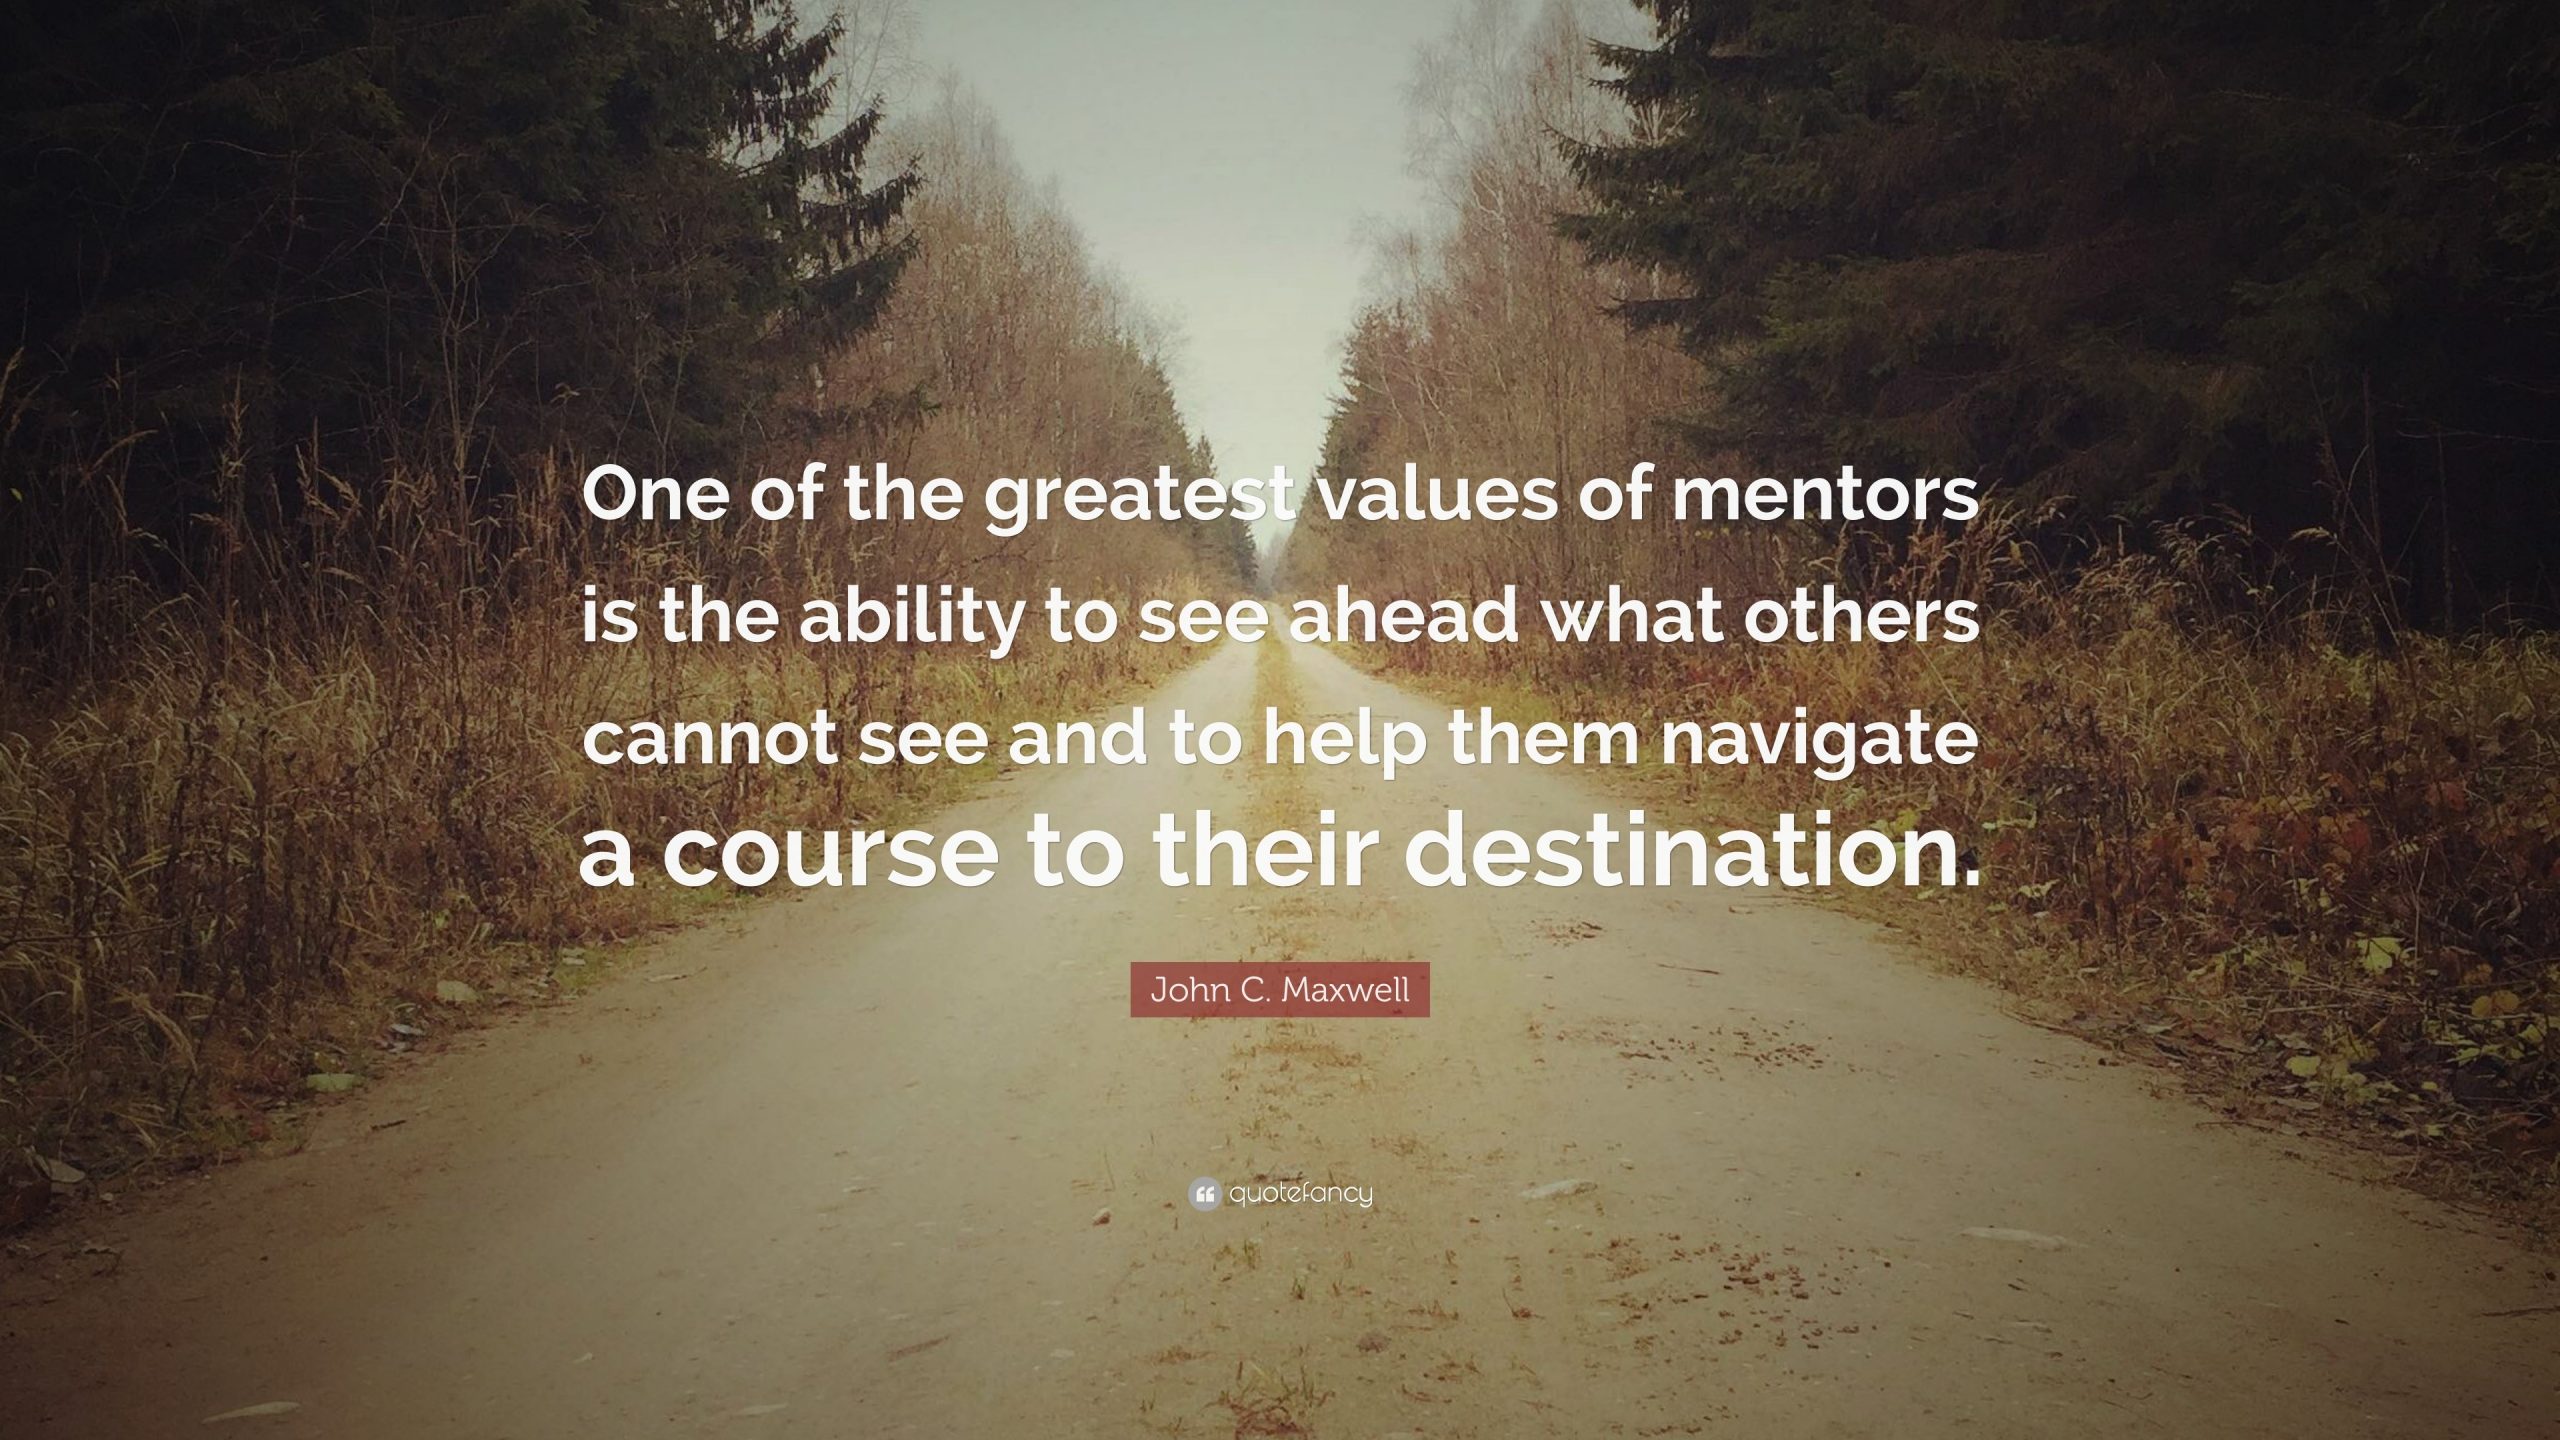 10 Inspirational Quotes About Mentors You Need to Hear